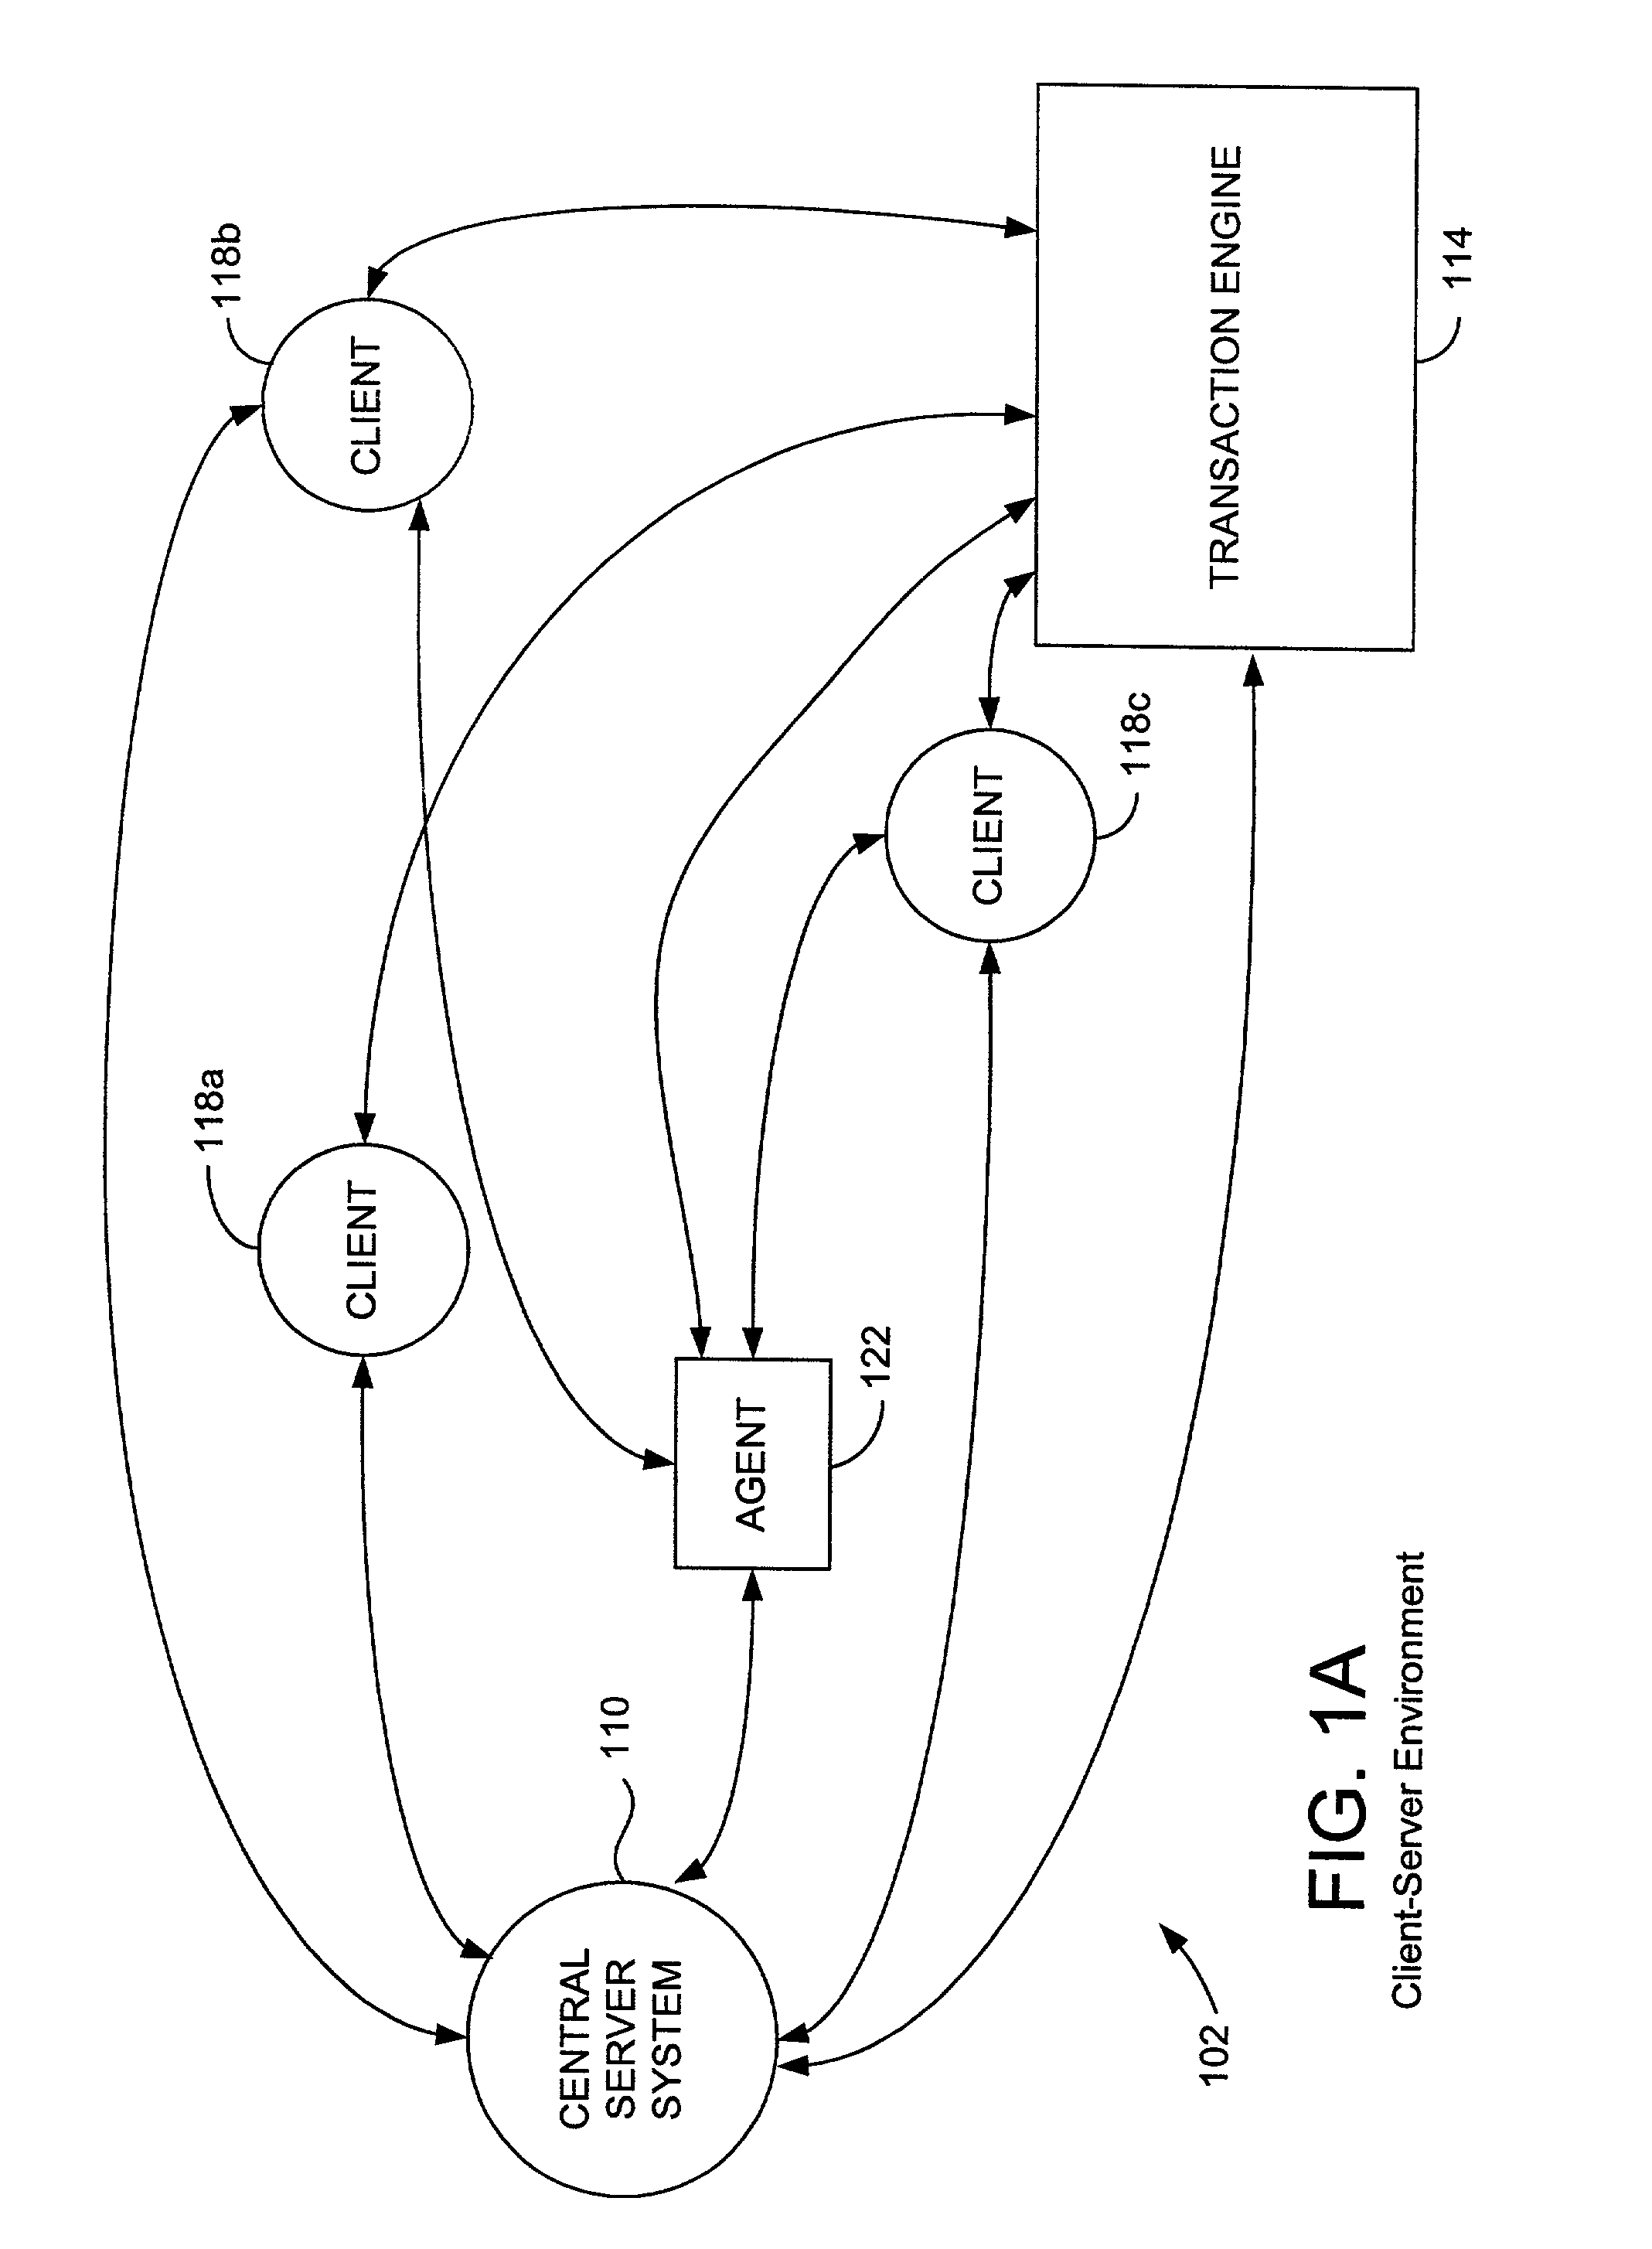 Distributed quantum encrypted pattern generation and scoring